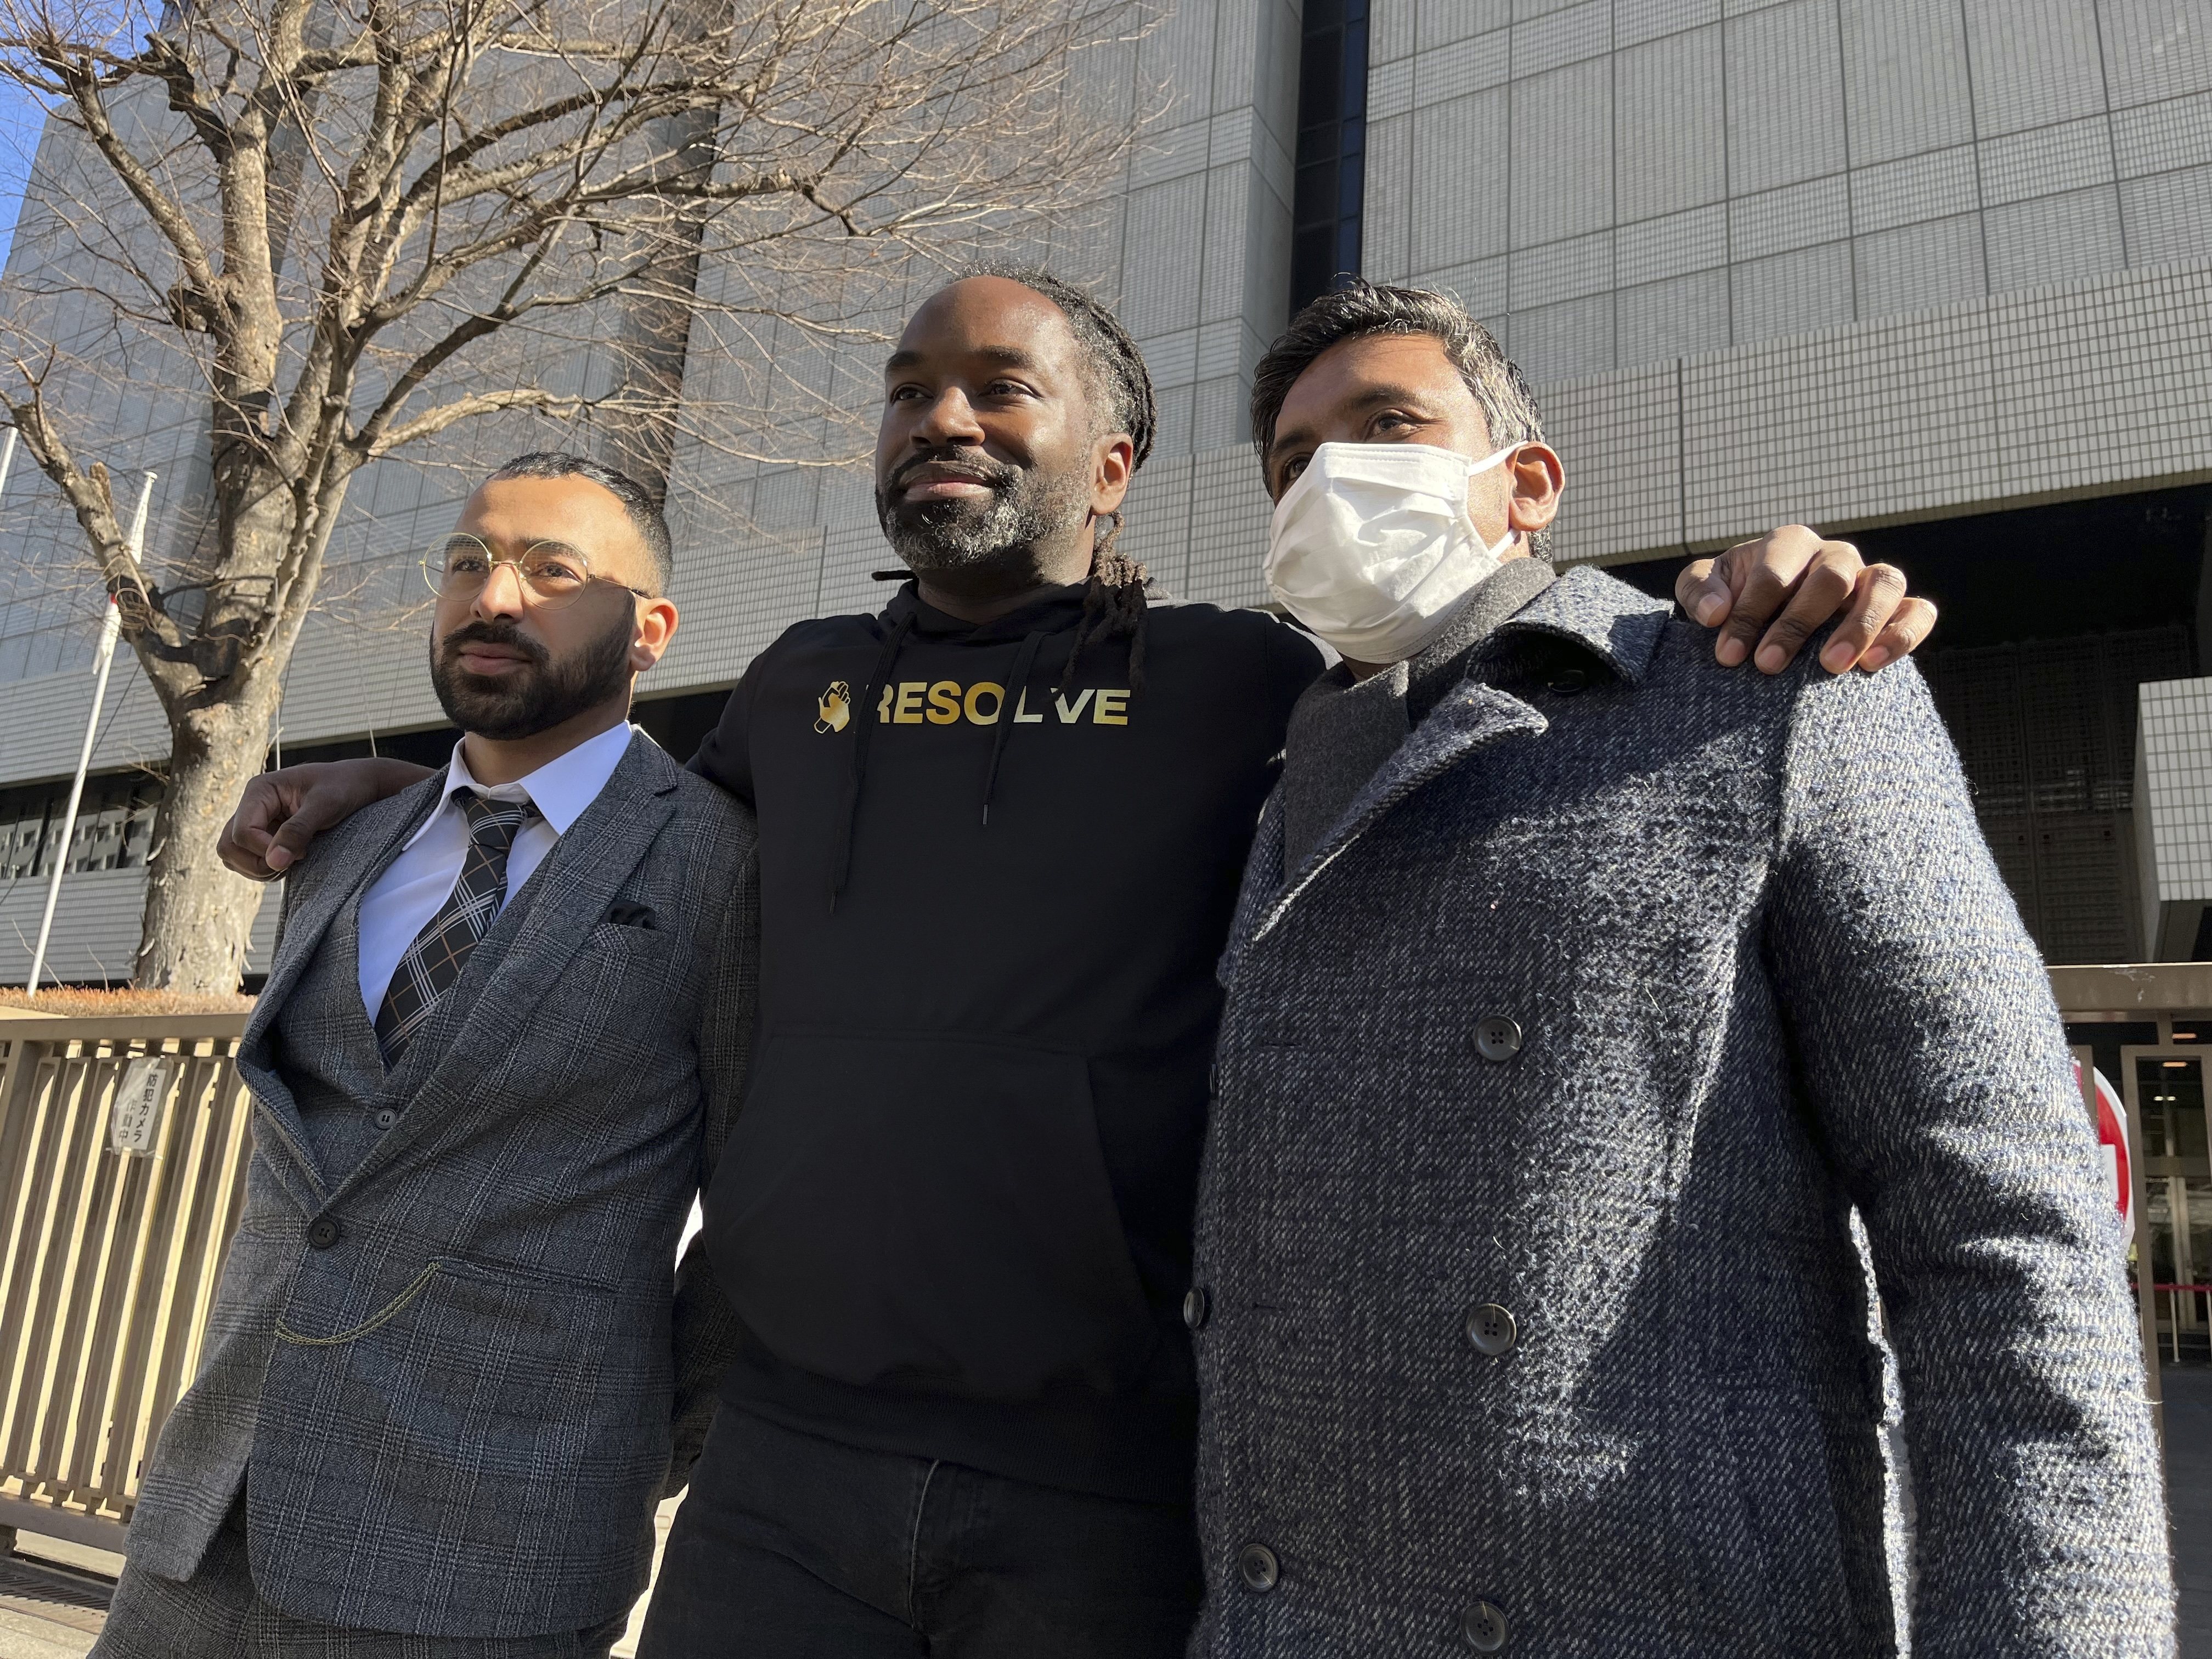 Three foreign born resident of Japan filed a civil lawsuit on Monday demanding an end to what it calls racial profiling by police. Photo: AP